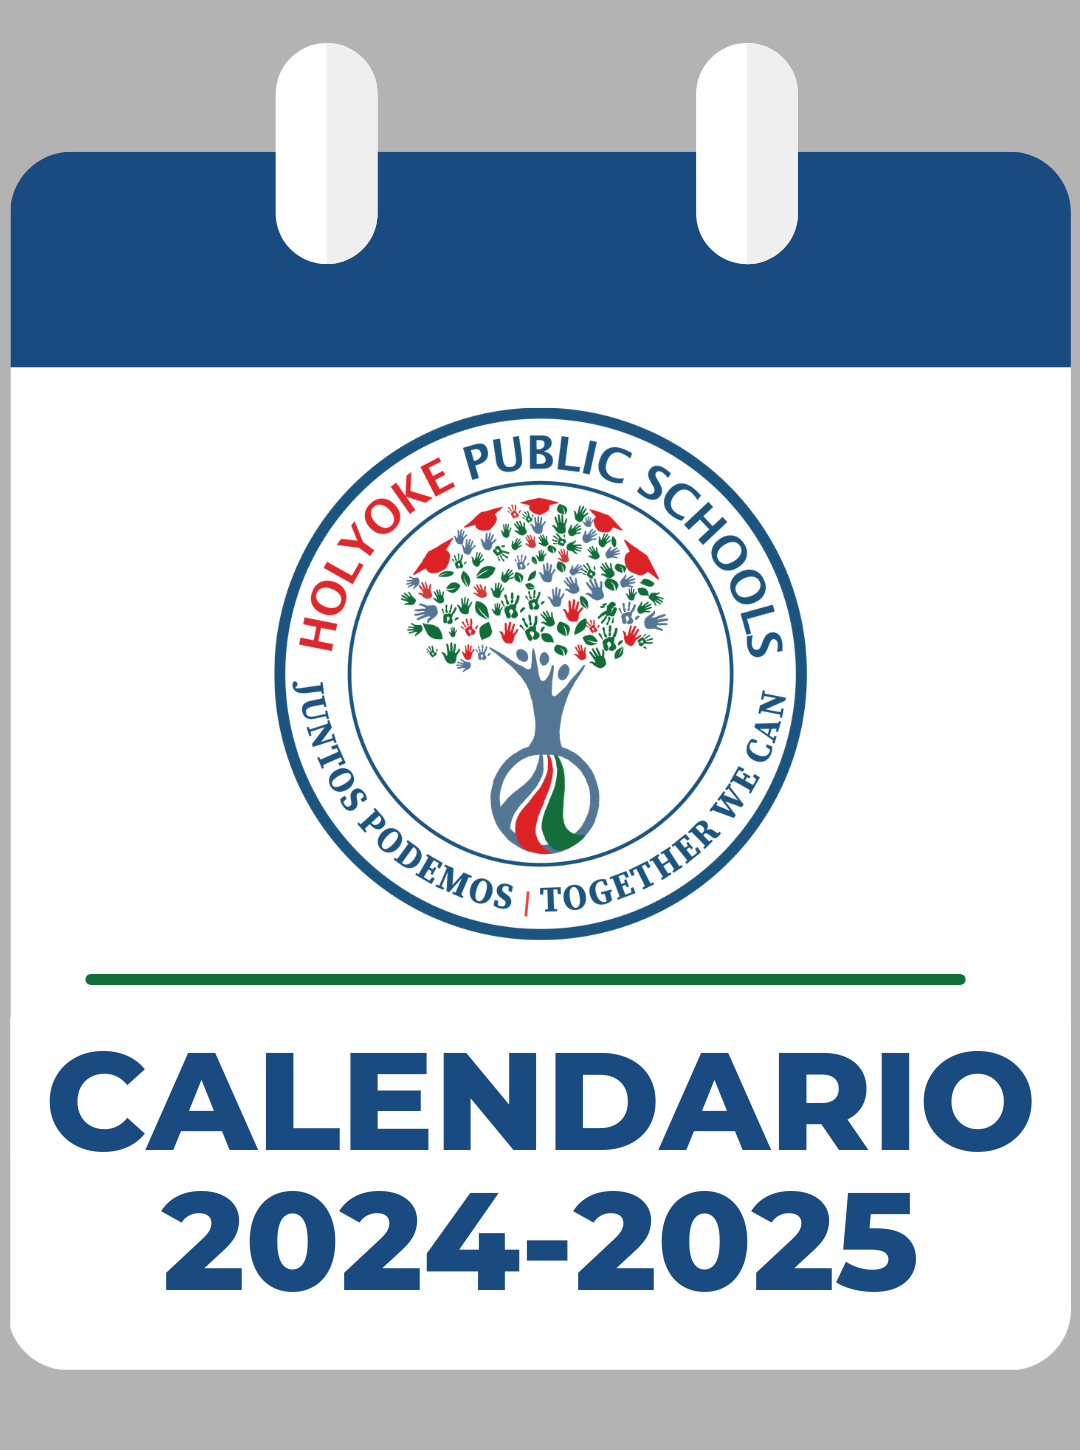 Graphic of HPS logo and words Calendar 2024-2025.